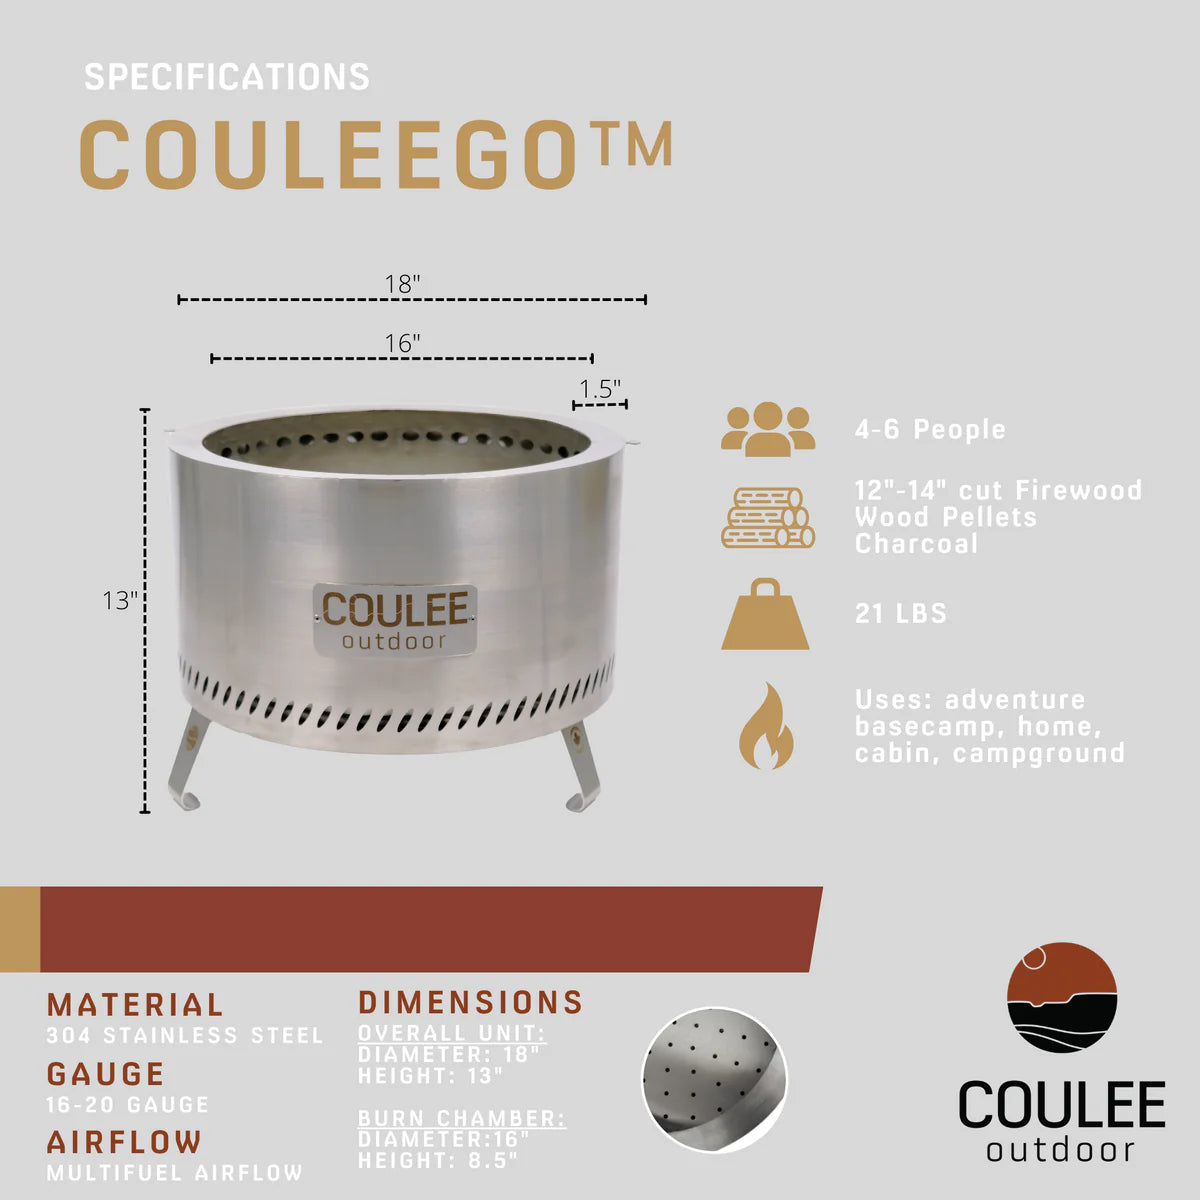 CouleeGo™